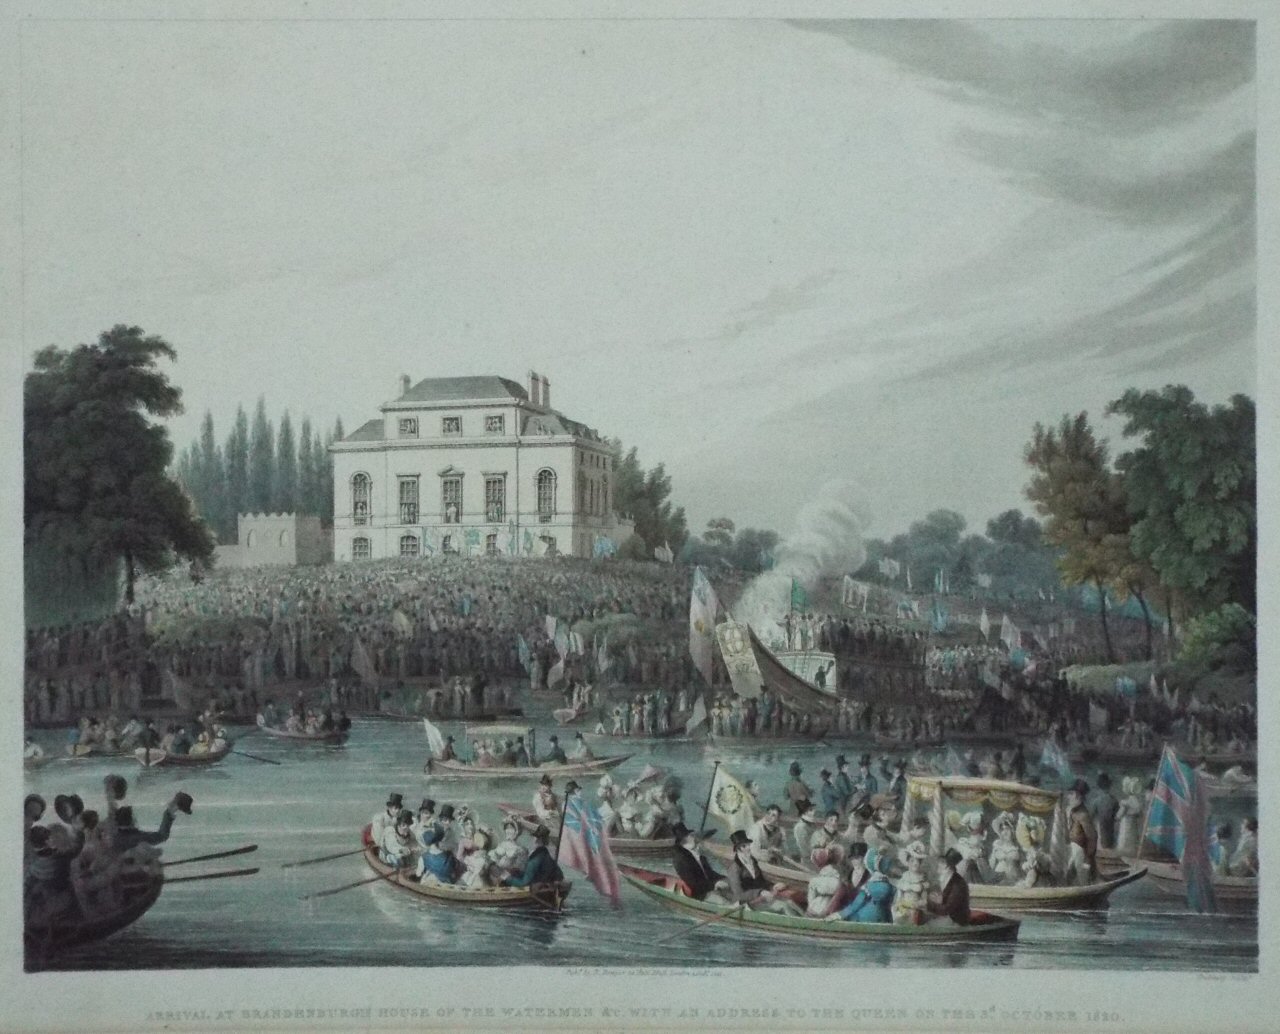 Aquatint - Arrival at Brandenburgh House of the Watermen &c. withan address to the Queen on the 3d. October 1820.